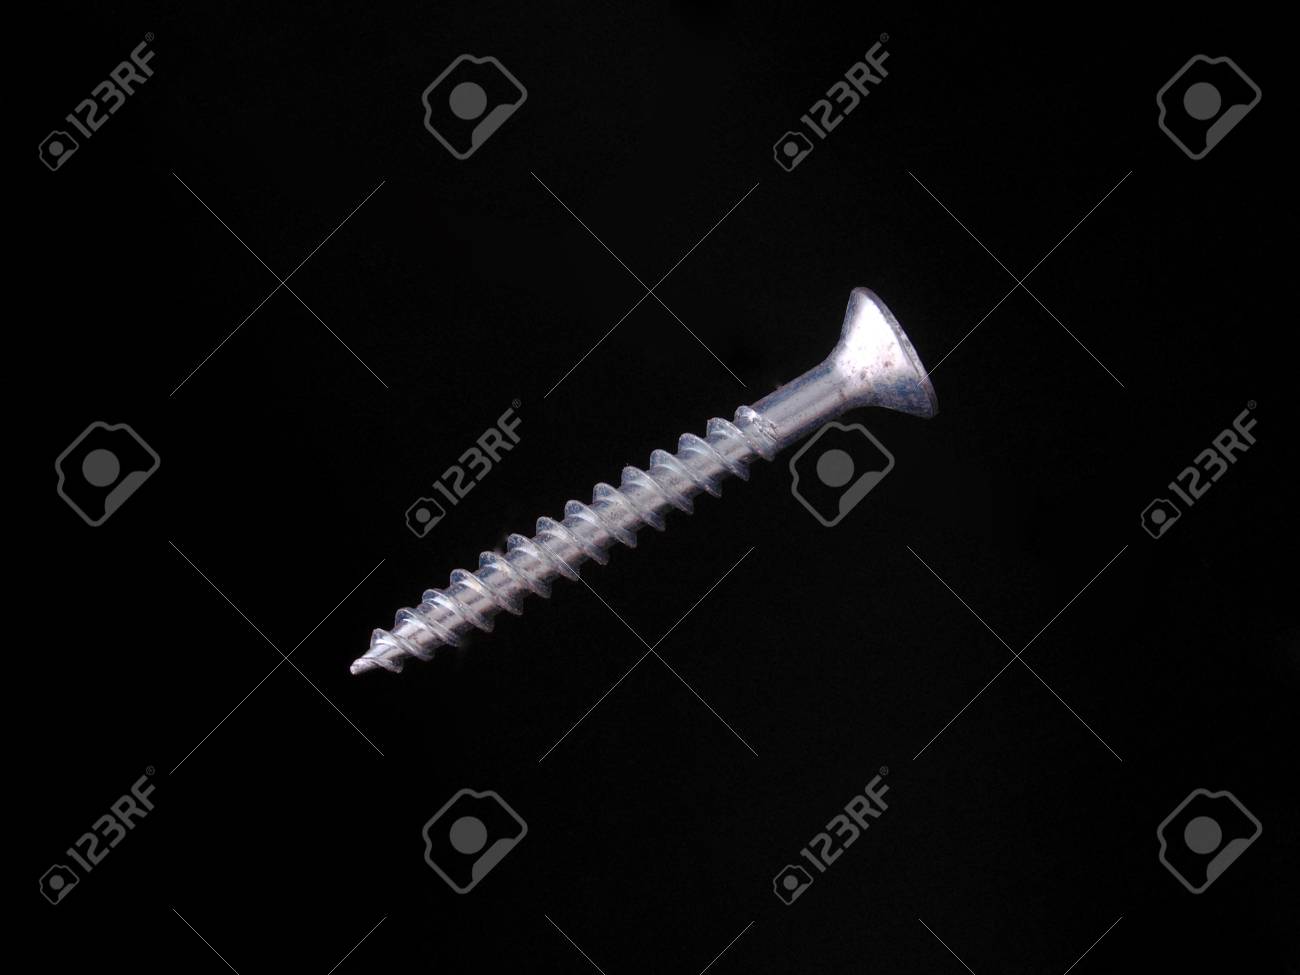 Steal Wood Screw On A Black Background Stock Photo Picture And